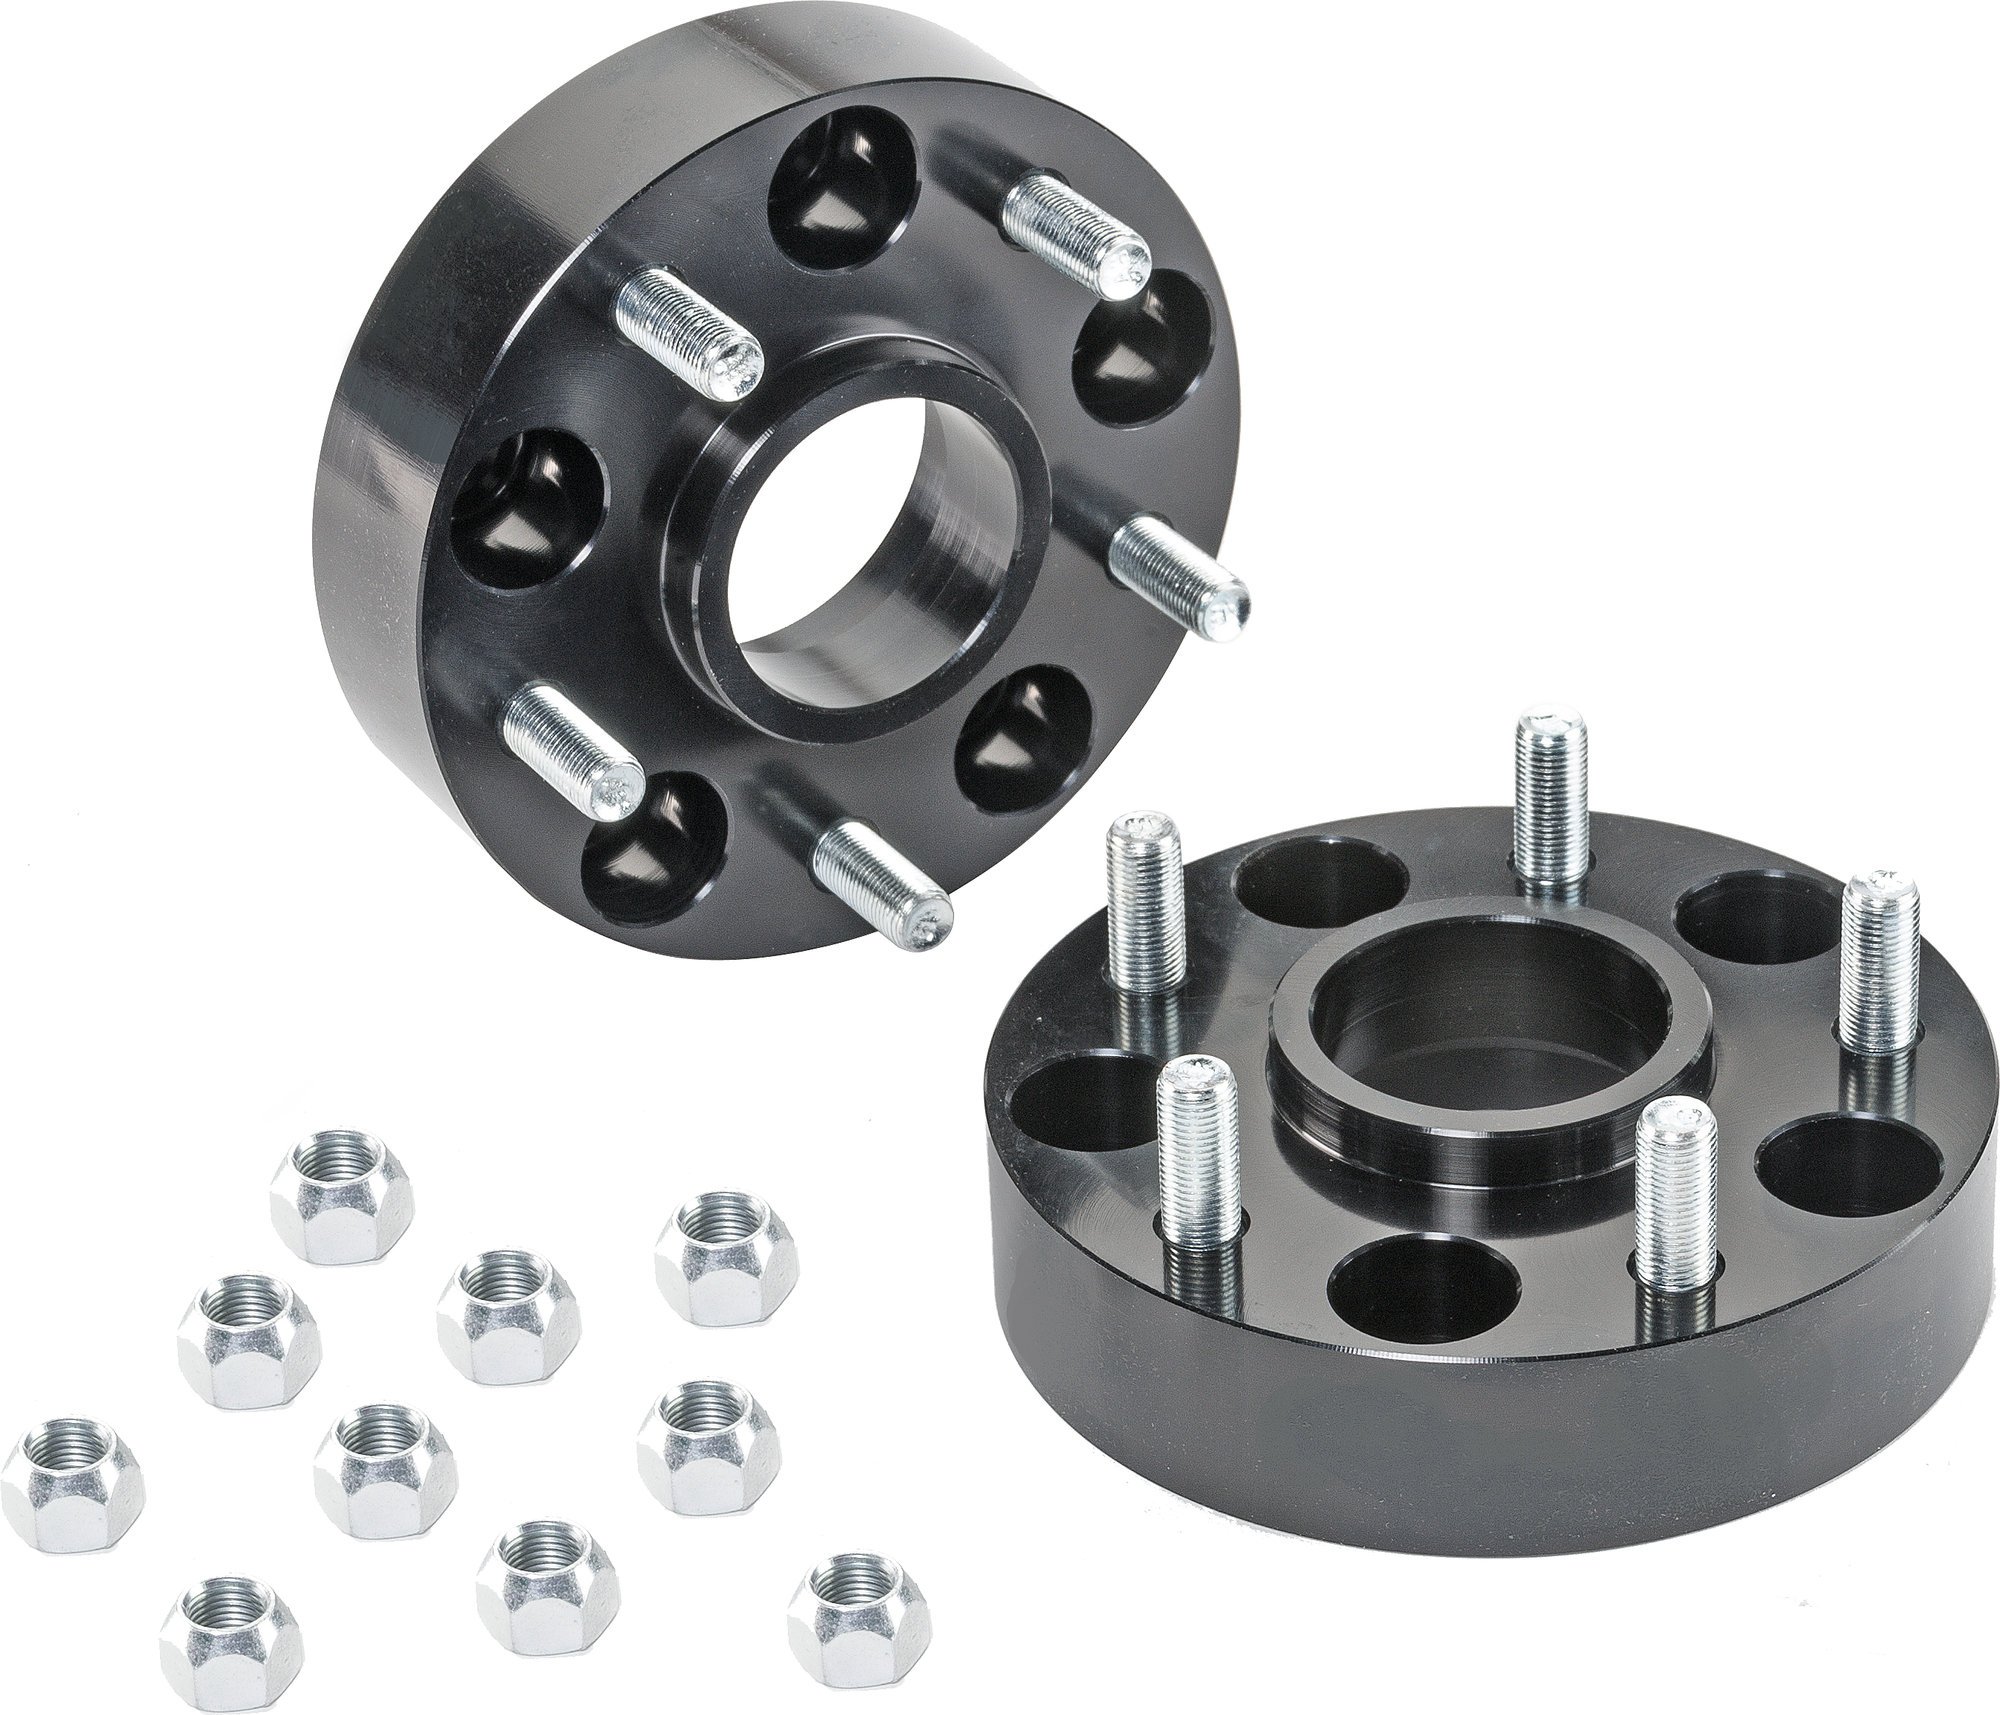 ▶ 4 JEEP JK WHEEL SPACERS 5X5 HUBCENTRIC 1.5 INCH 38MM RUBICON WRANGLER 5X127 ◀ 